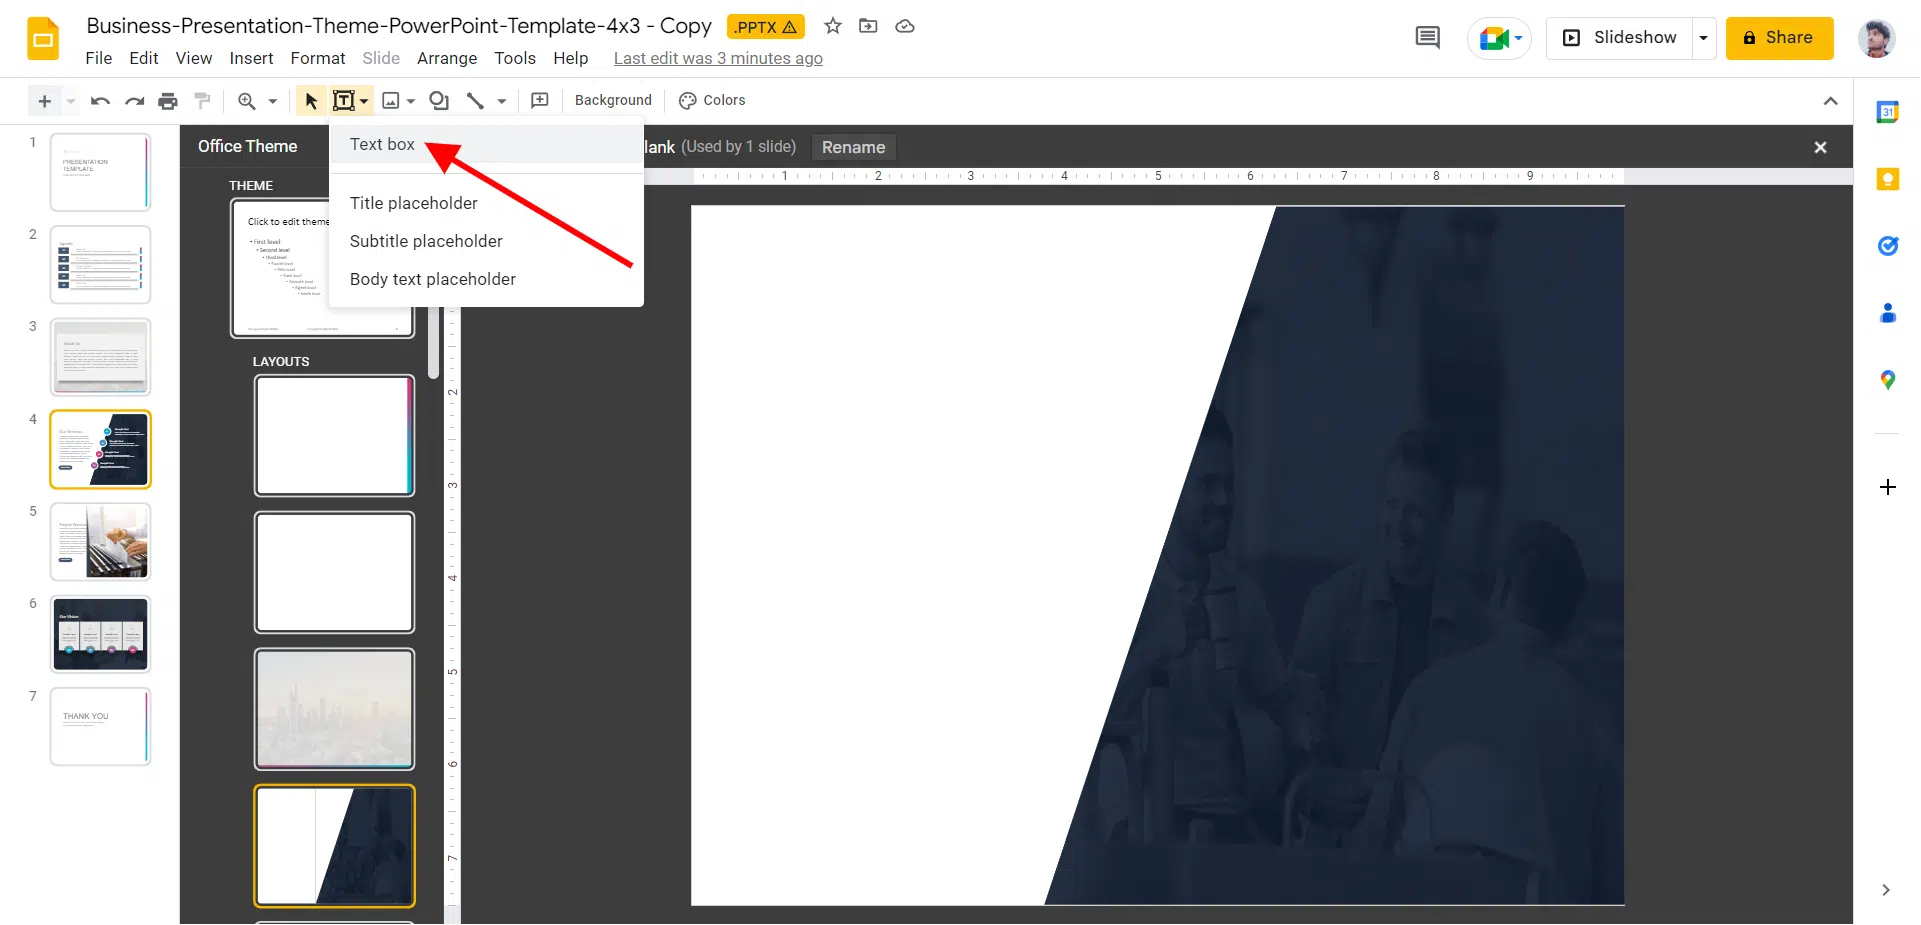 how to edit header and footer in google slides